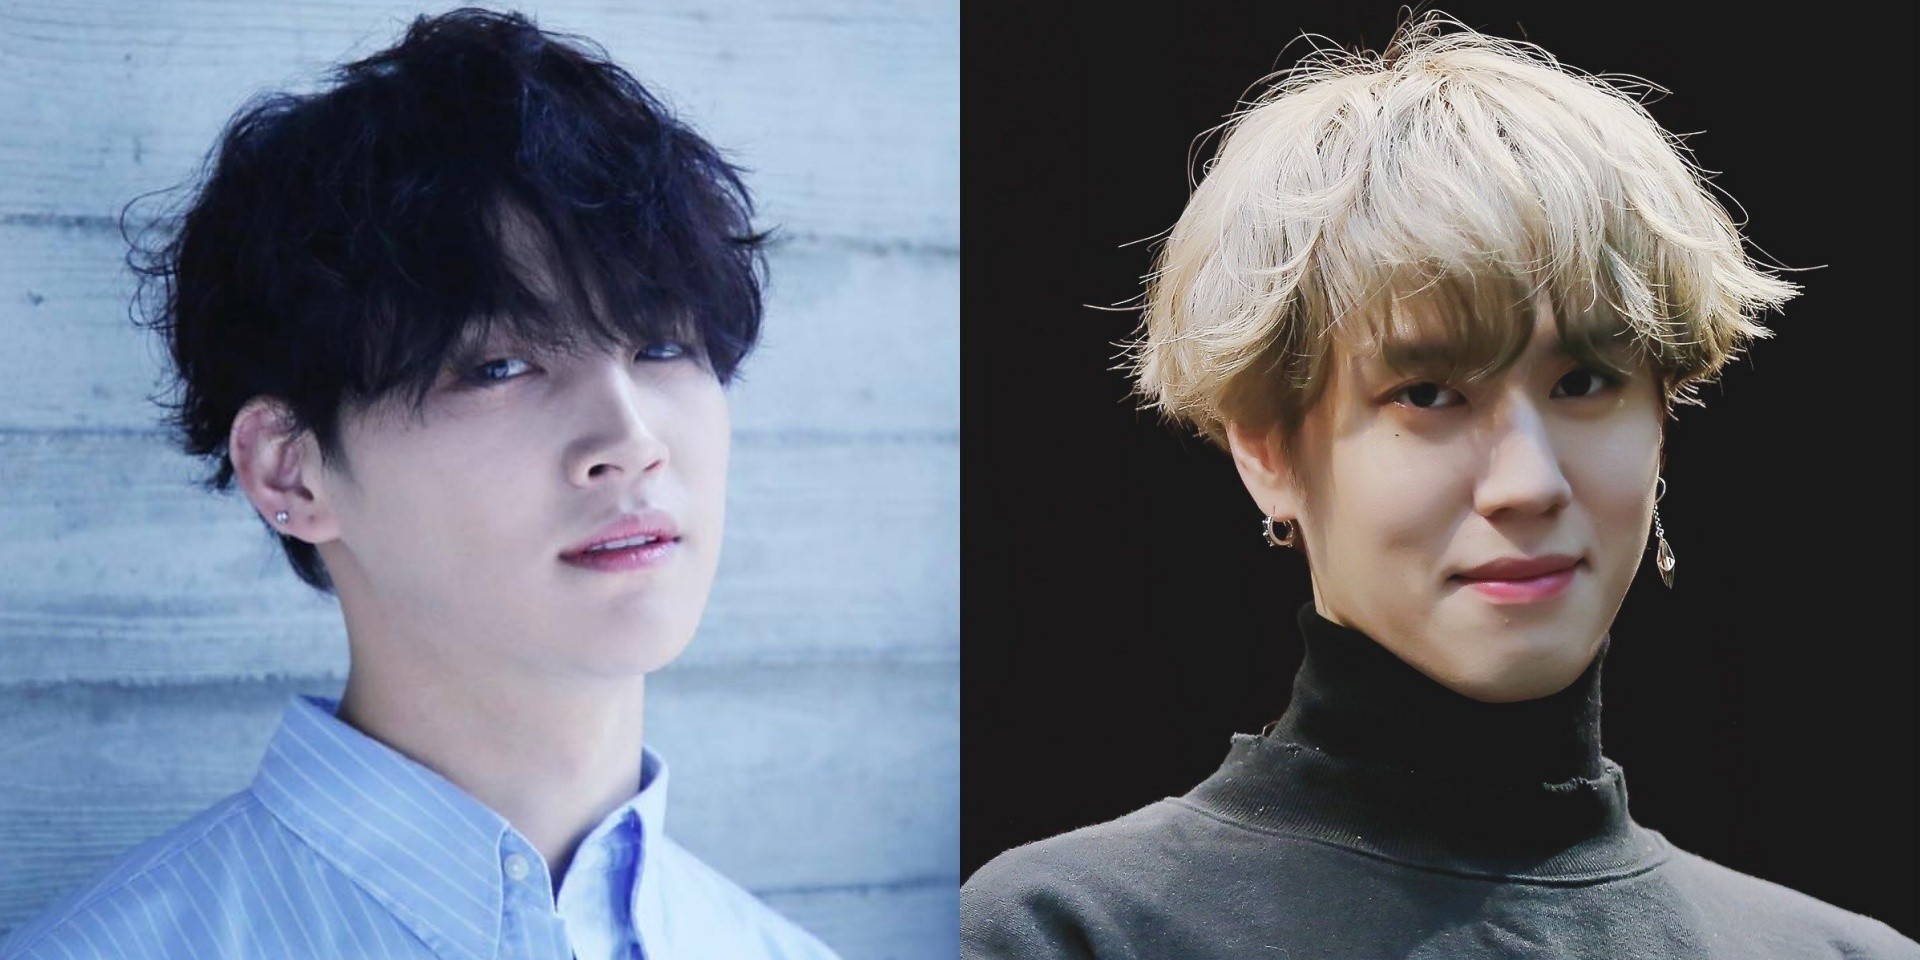 GOT7's Lim Jaebeom and Yugyeom (Jus2) to perform in Singapore in May